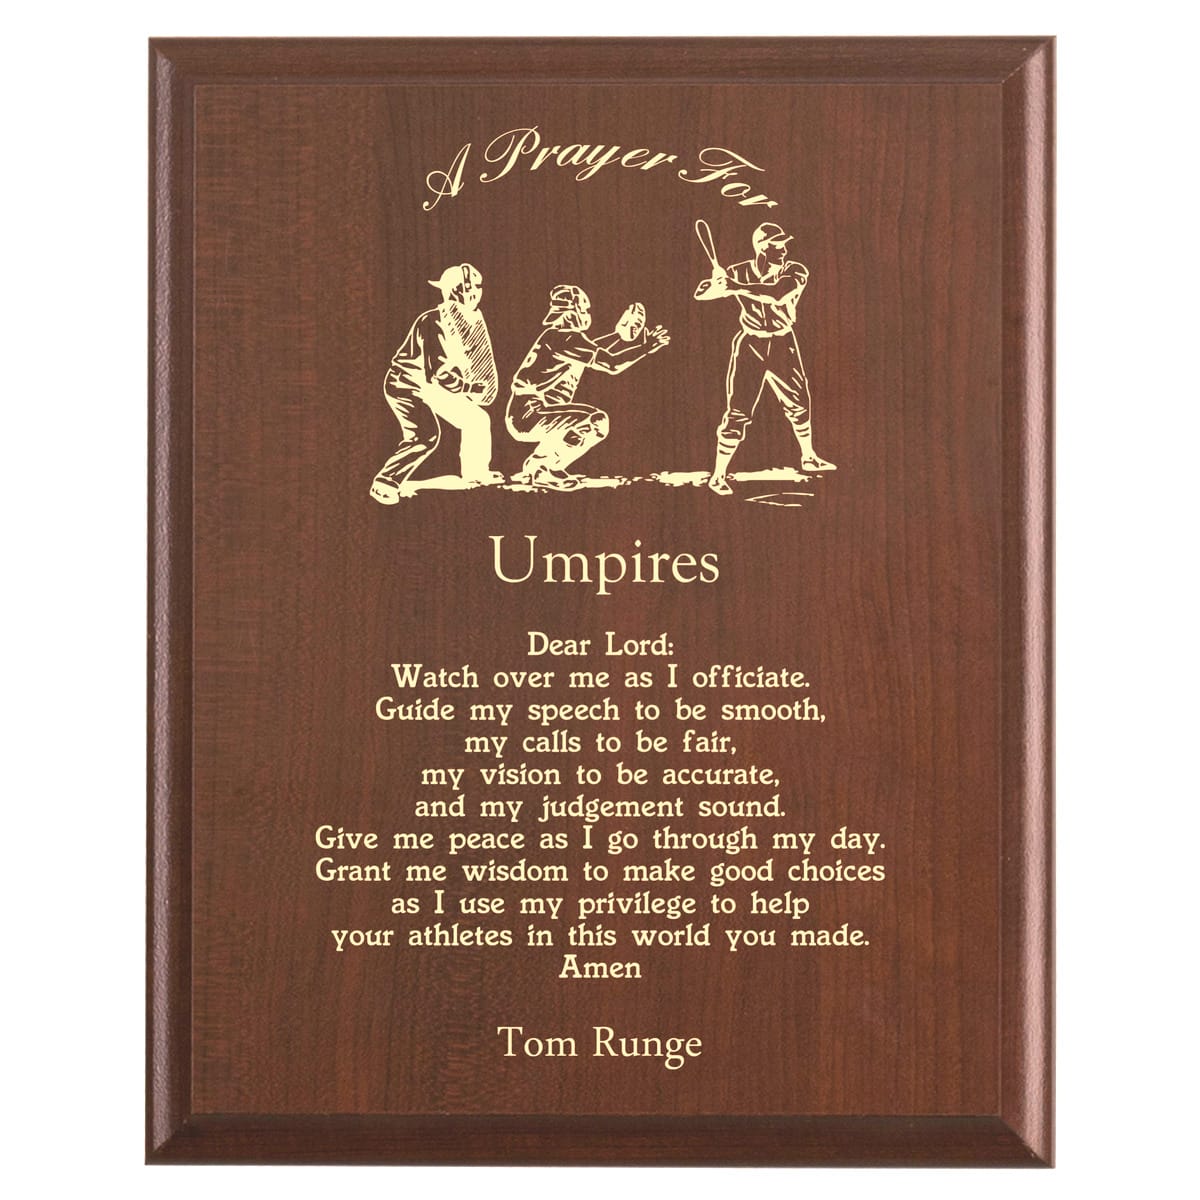 Plaque photo: Umpire Prayer Plaque design with free personalization. Wood style finish with customized text.